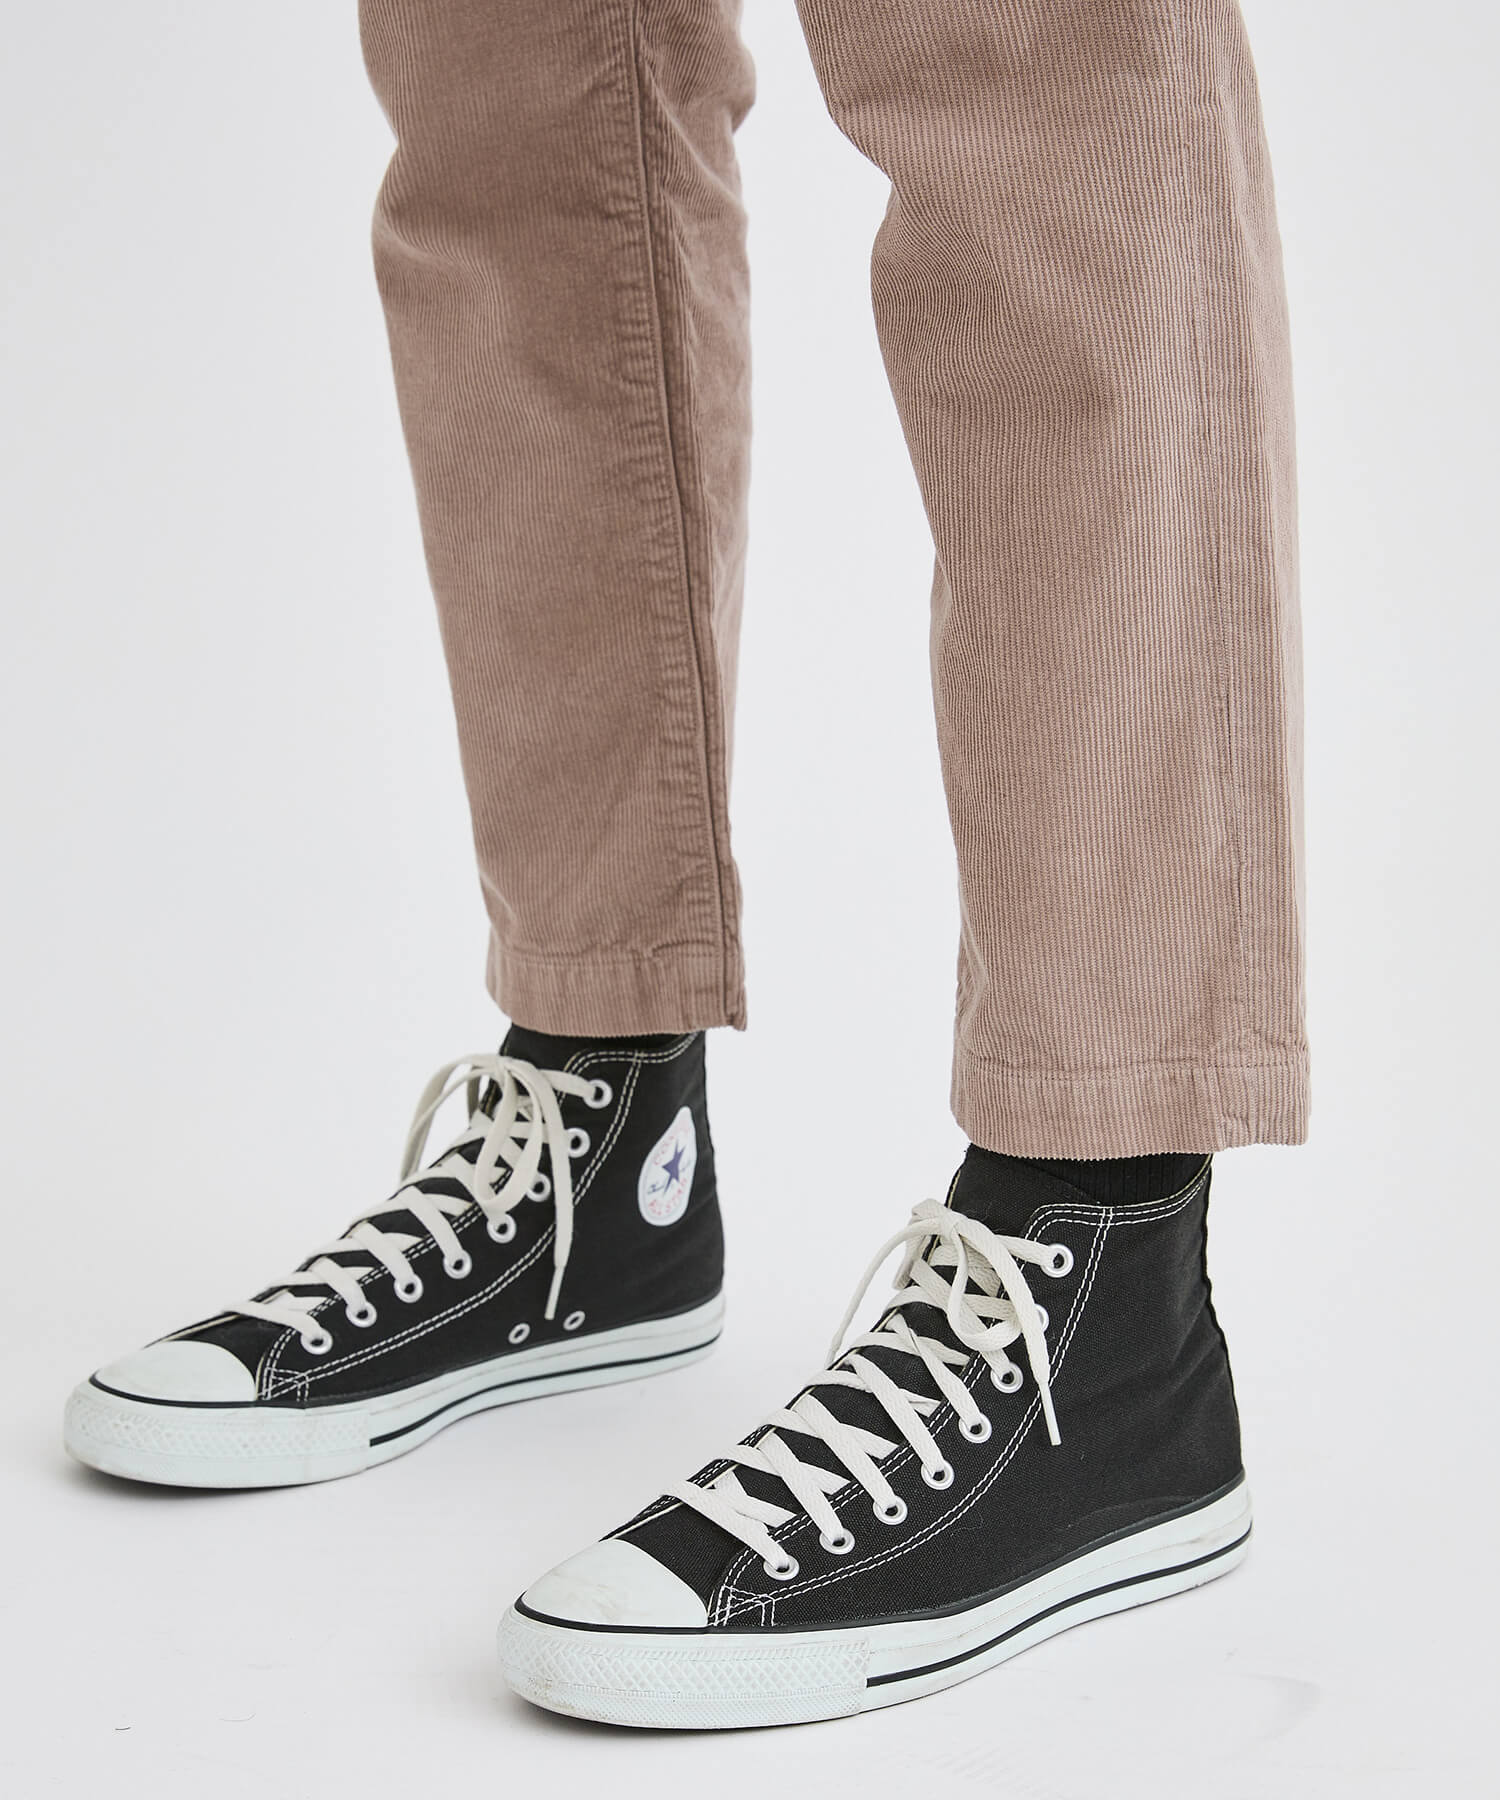 nonnative DWELLER CHINO TROUSERS RELAXED FIT COTTON CORD OVERDYED 